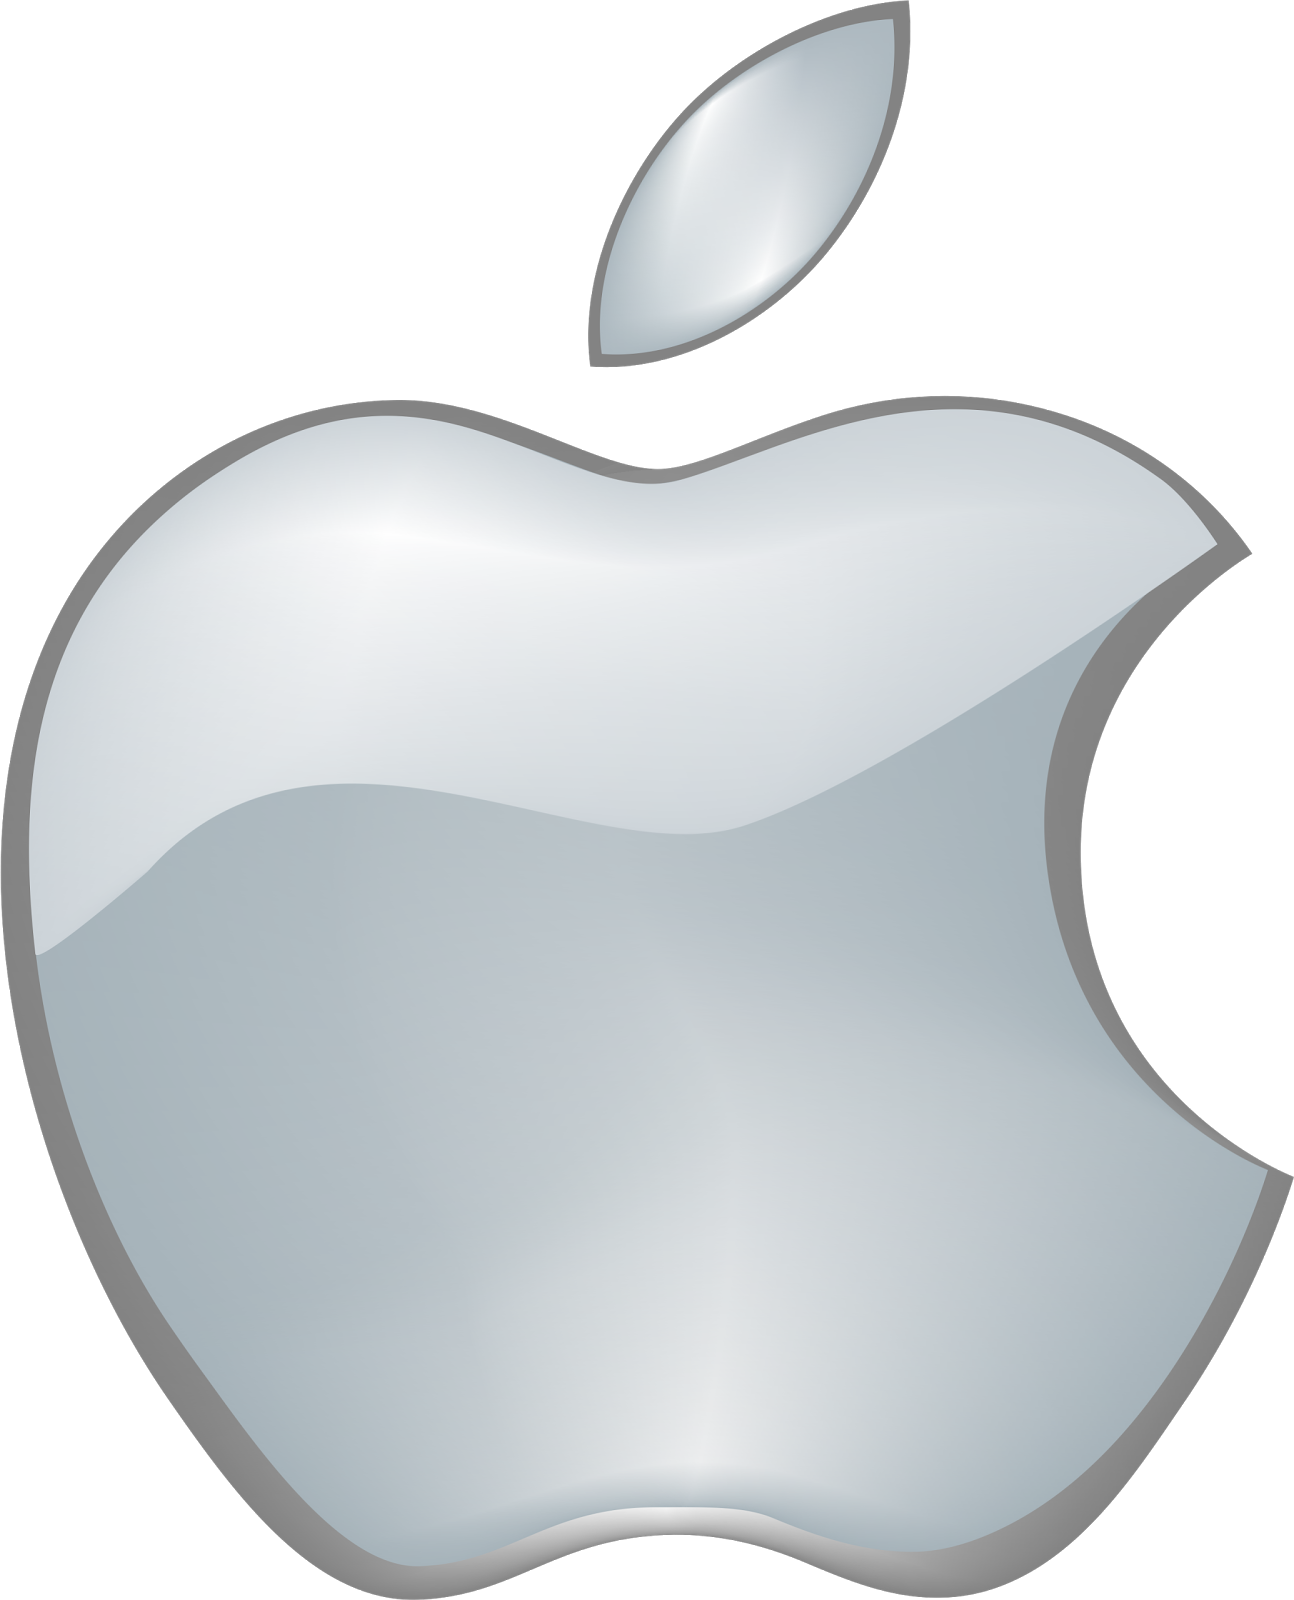 Classic Apple Logo - Bing images (With images) | Apple ... - Classic Apple Logo